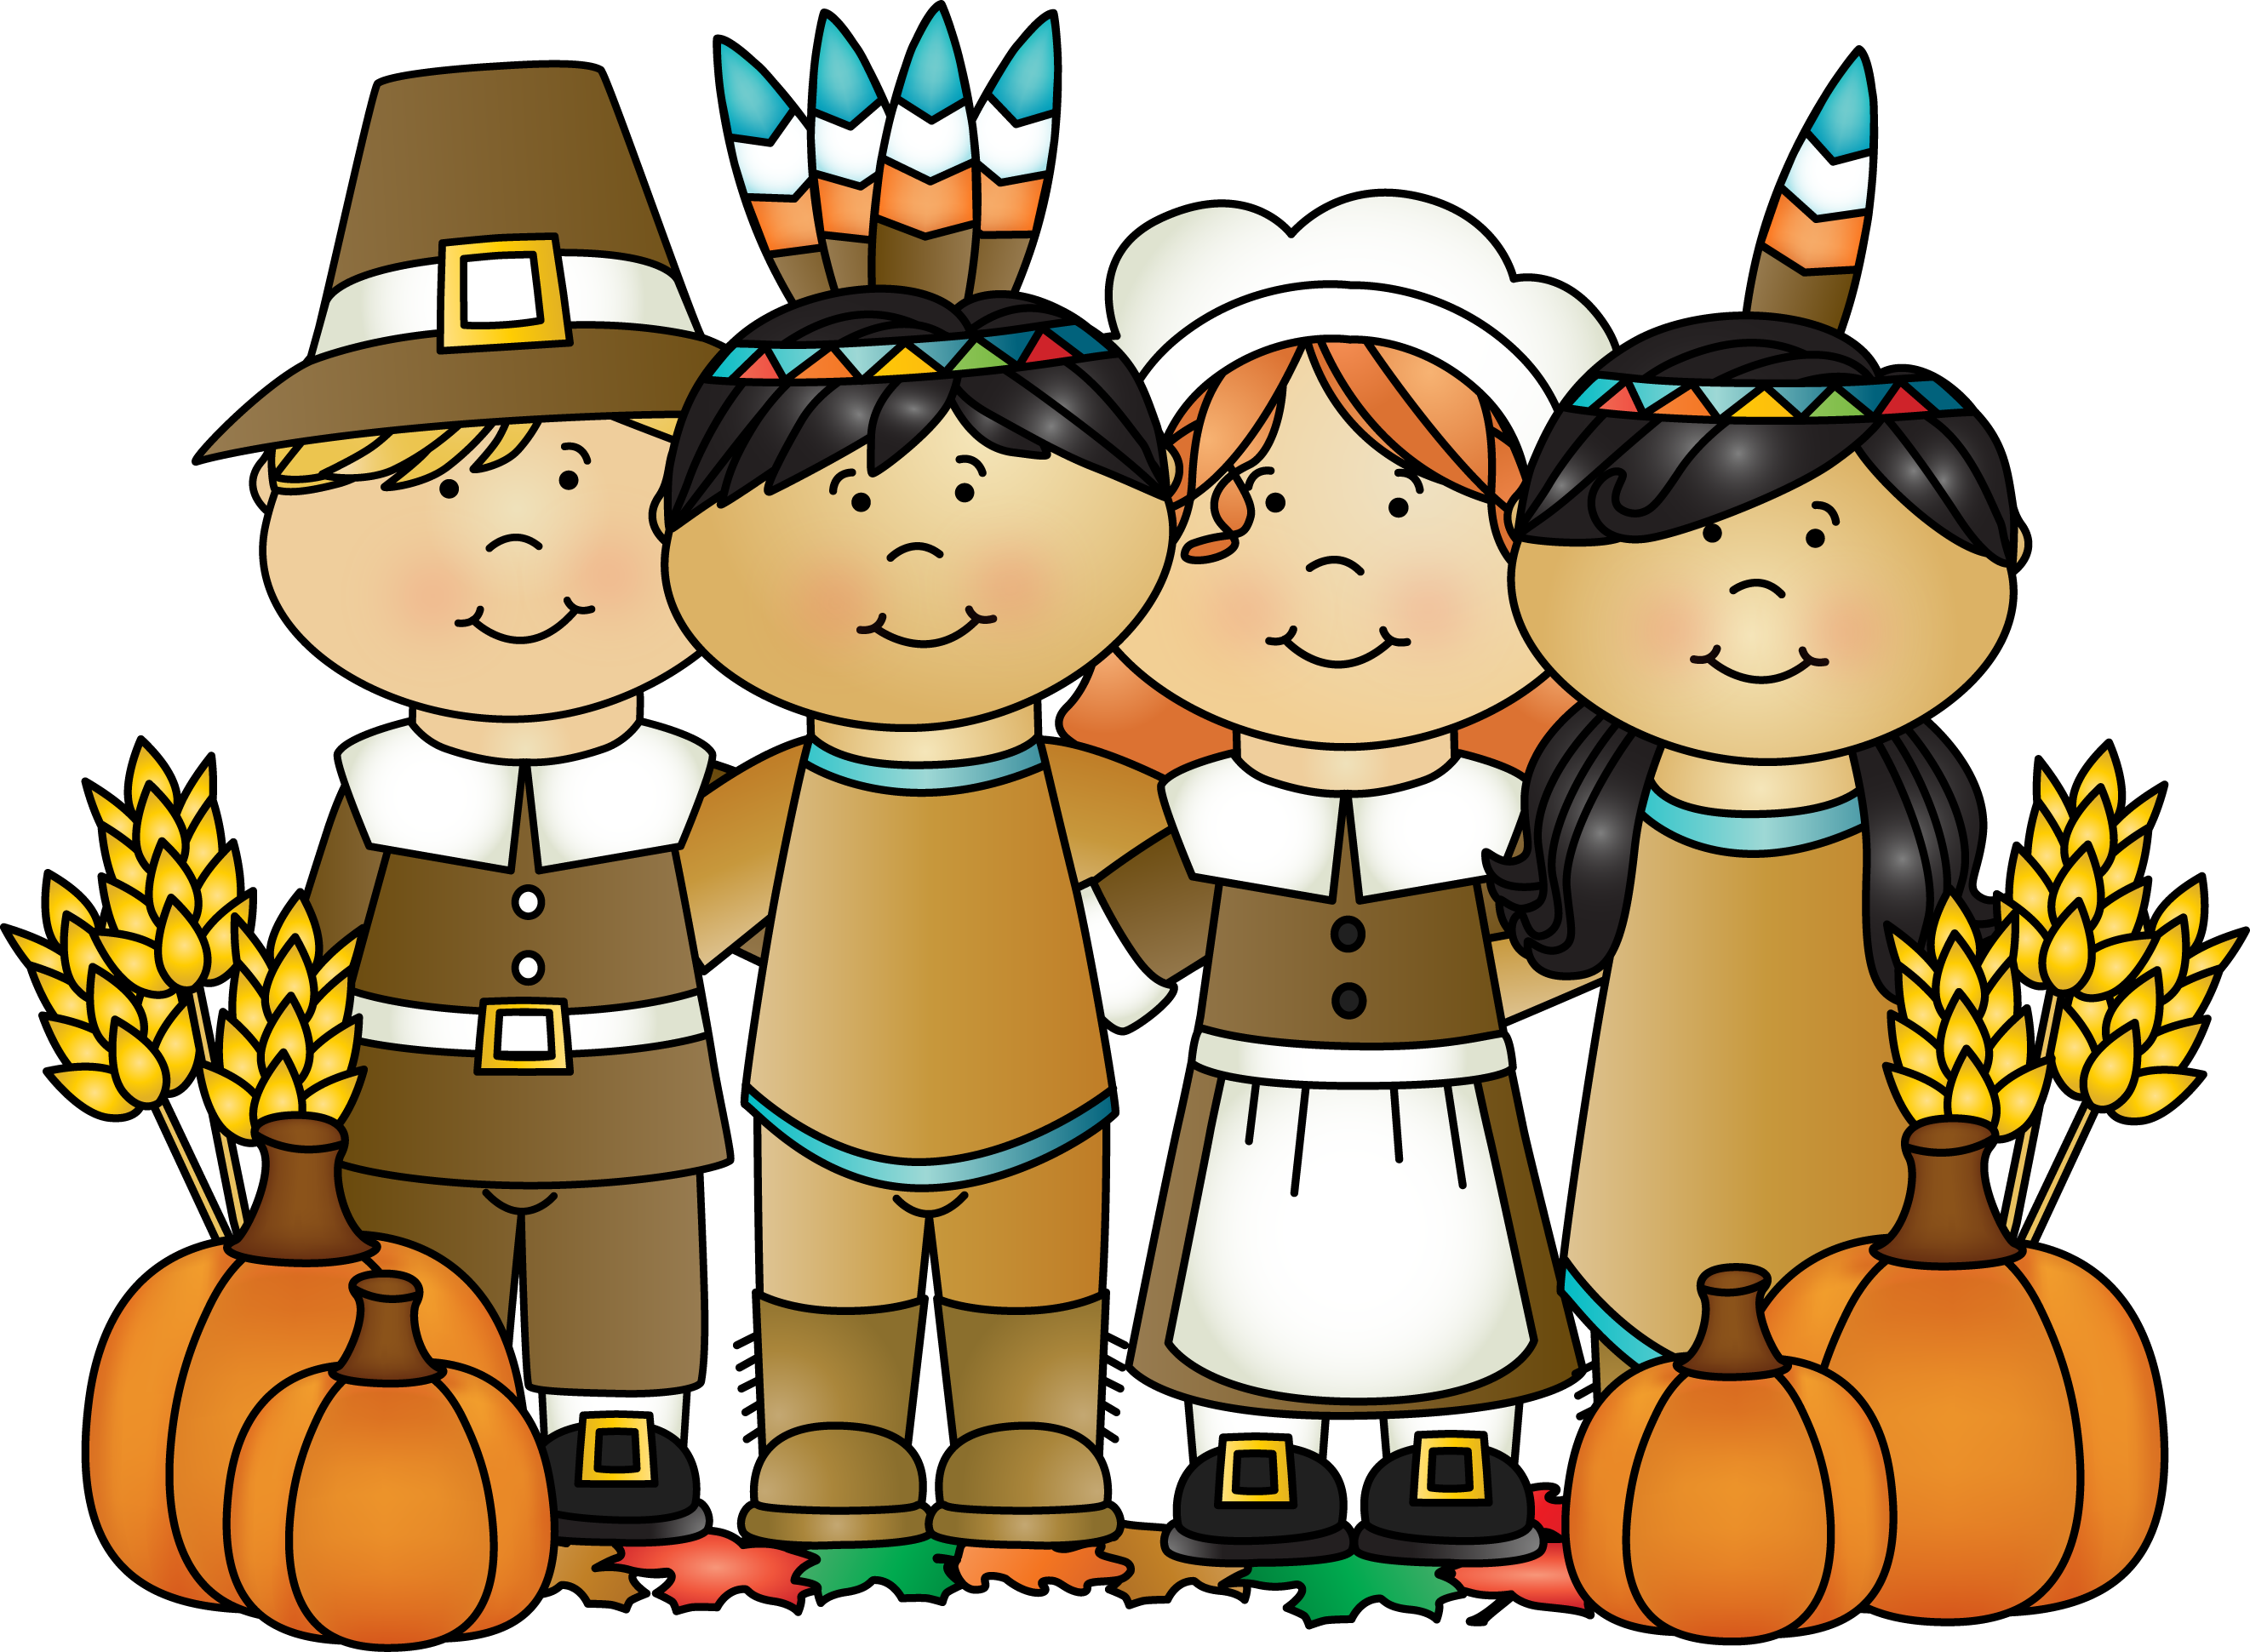 For Kindergarten Clipart . One of the Indians who was called Squanto came to help the Pilgrims for a while